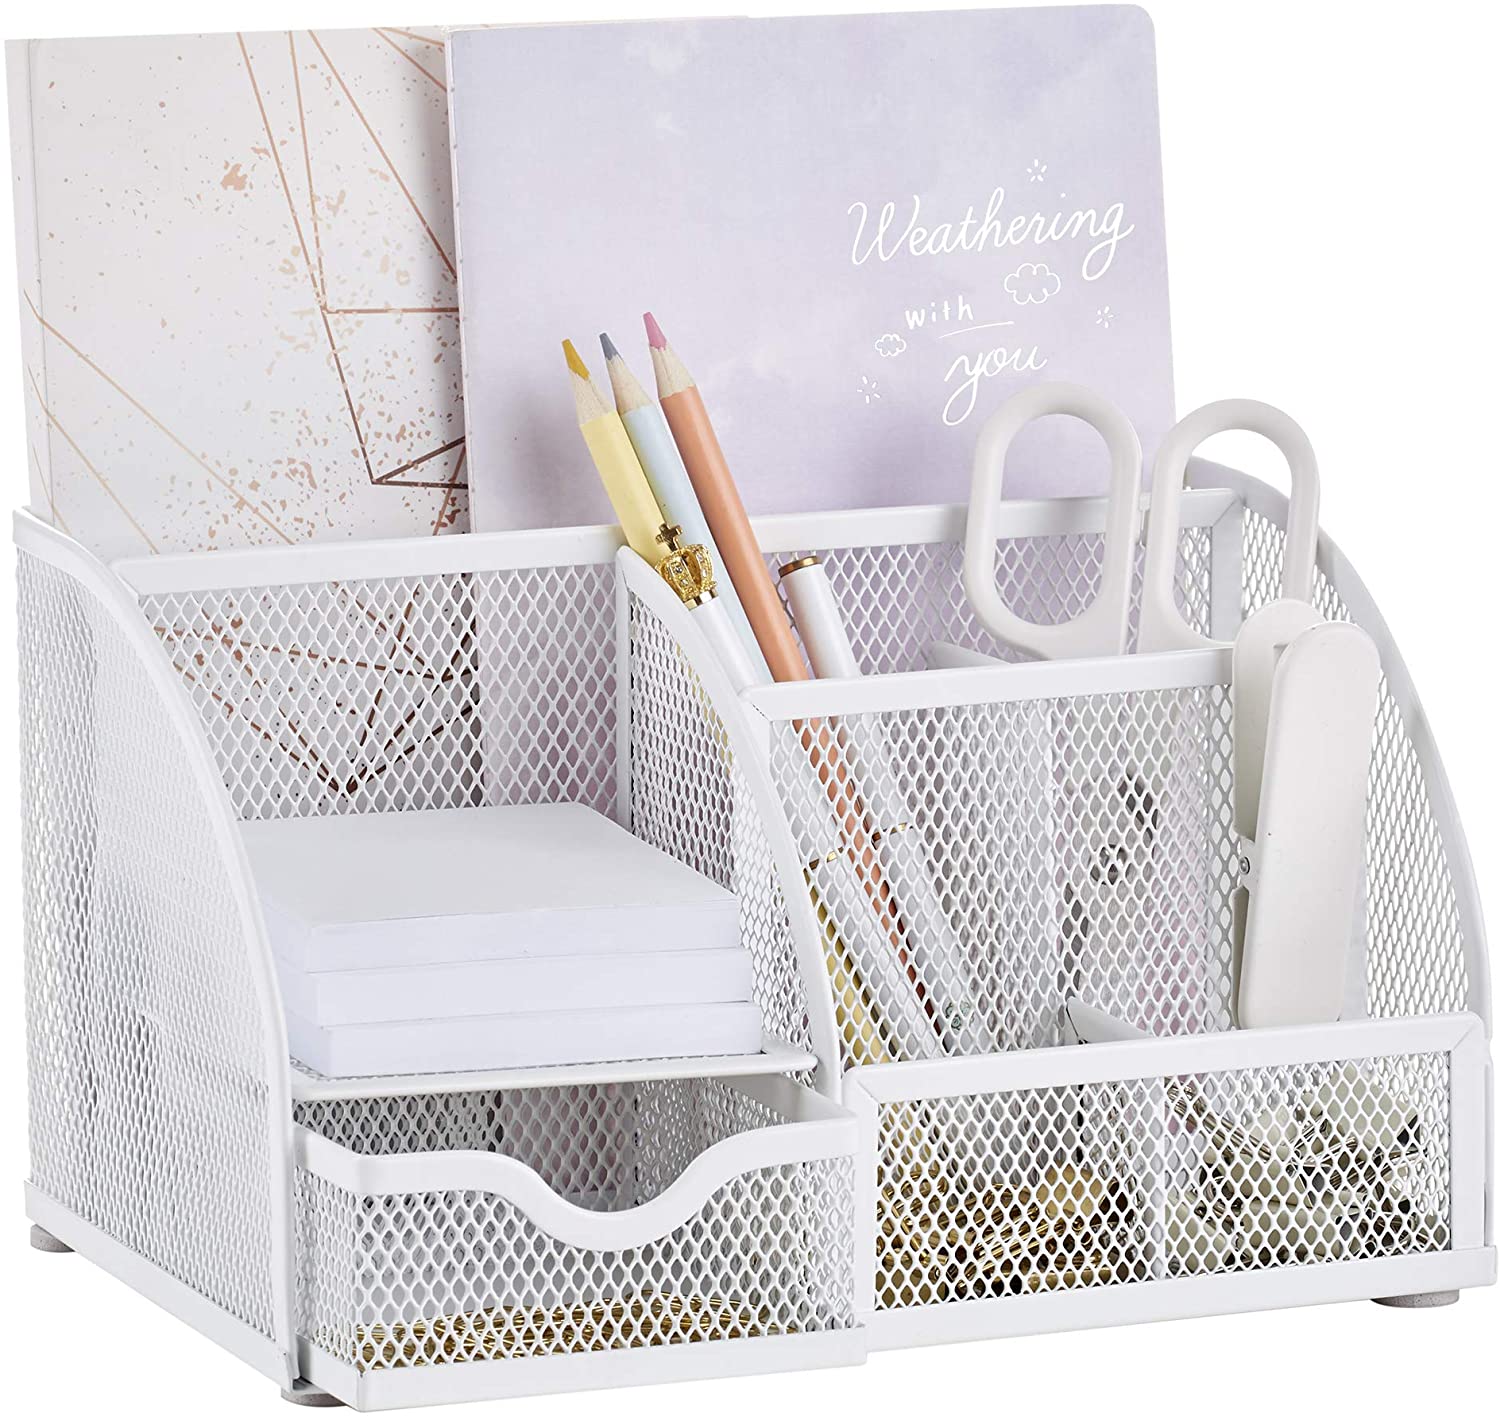 EXERZ Desk Organiser with 7 Compartments -Mesh Desk Tidy Caddy - White